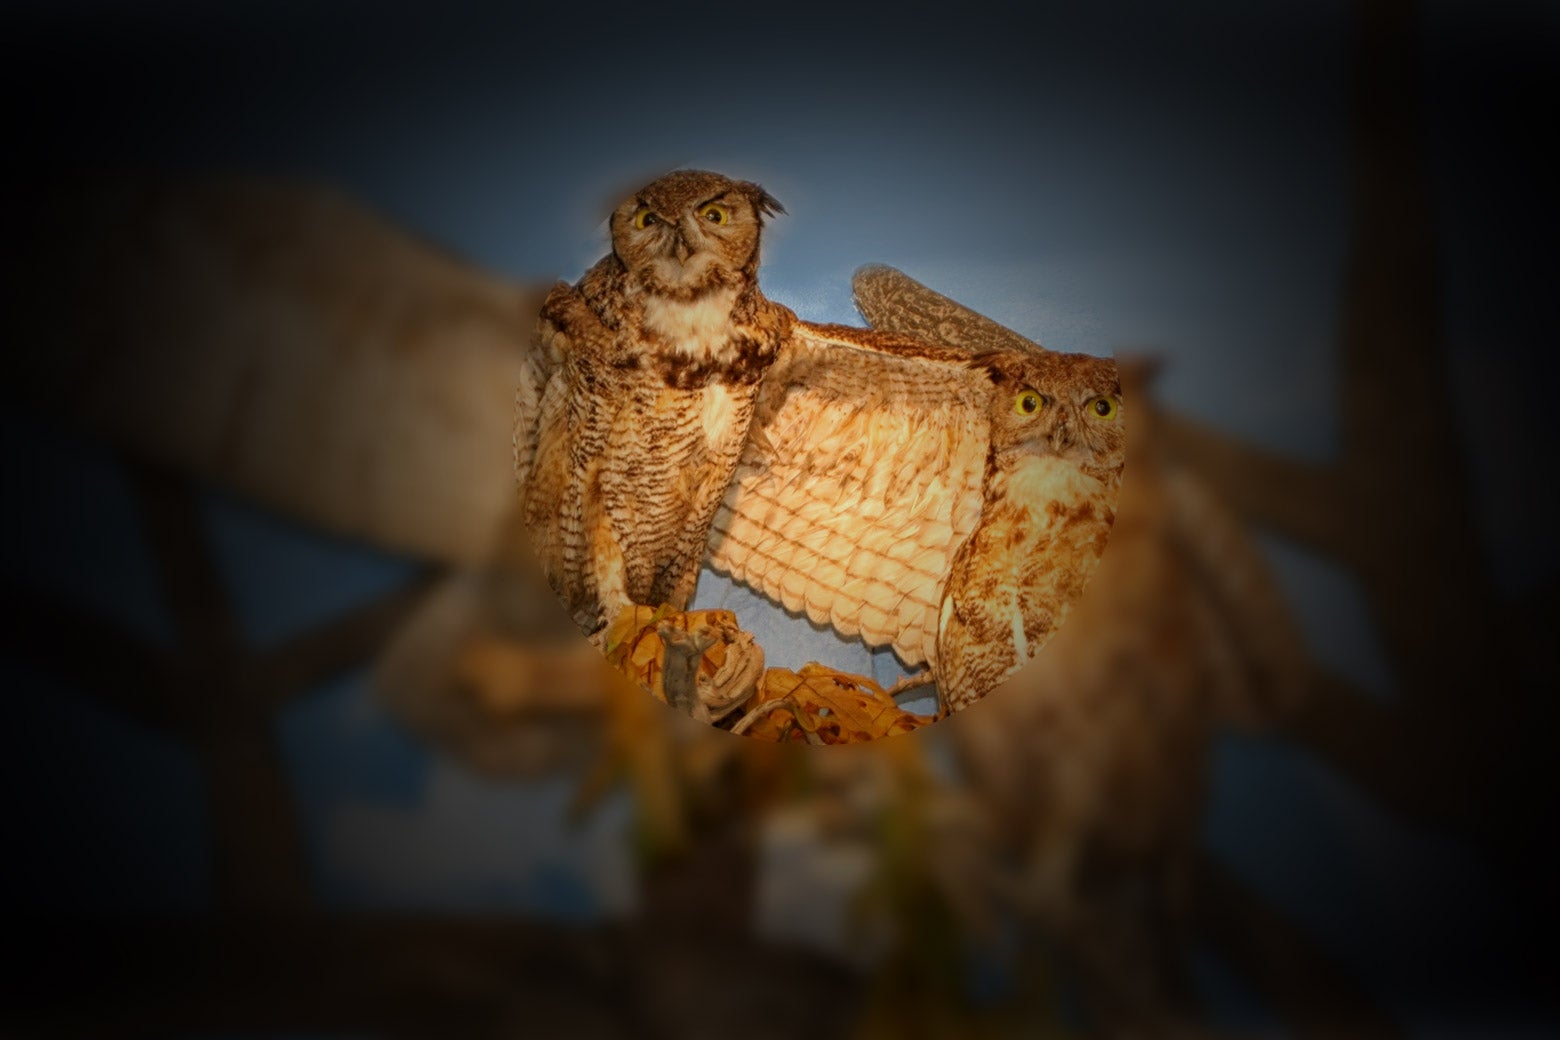 Two owl heads on display at a museum, with a vignette effect around them that creates a sense of tunnel vision.